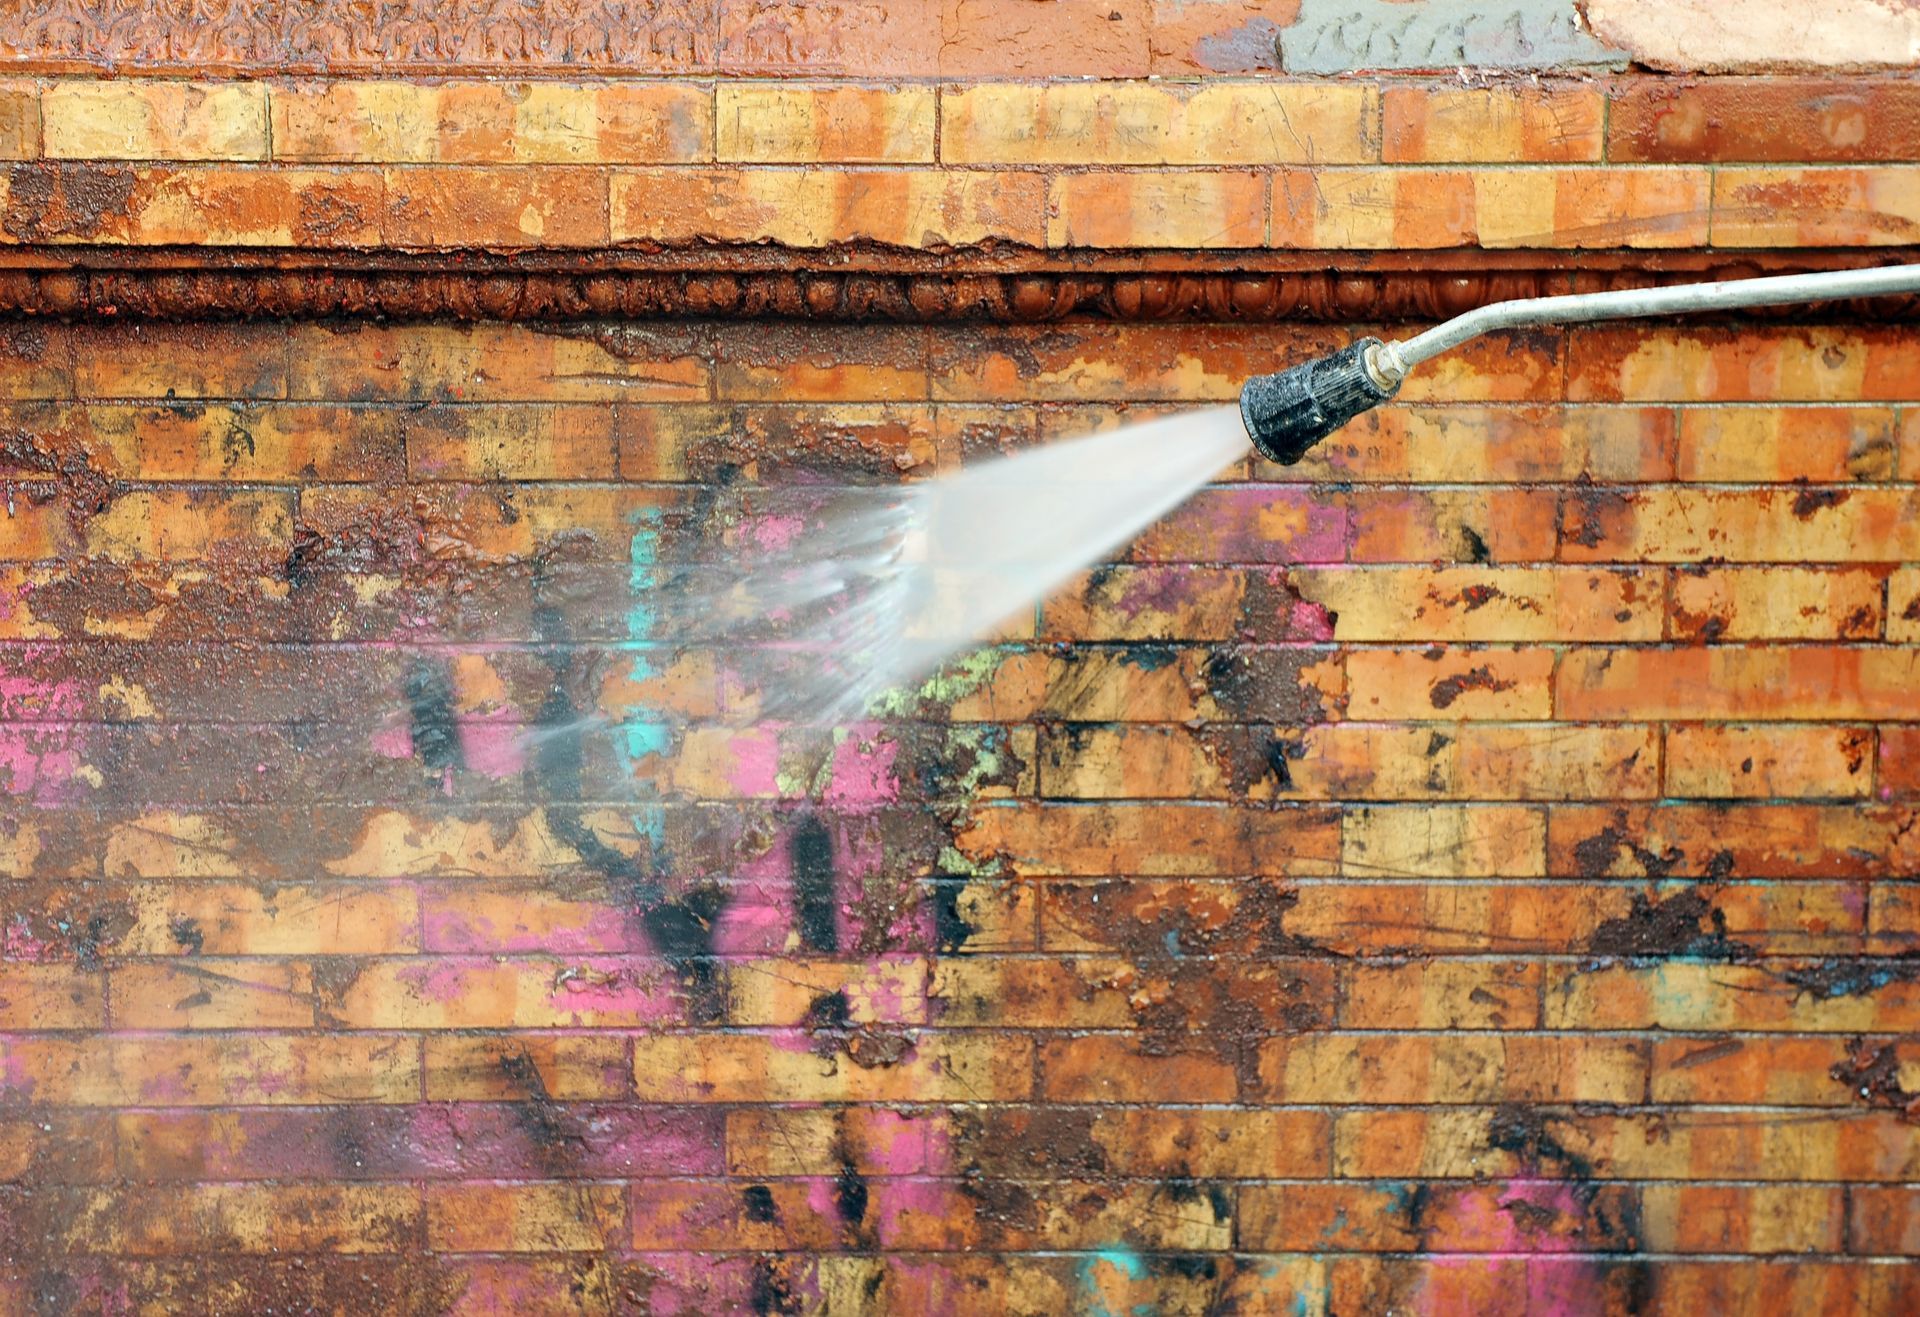 A person is cleaning graffiti on a brick wall with a high pressure washer.